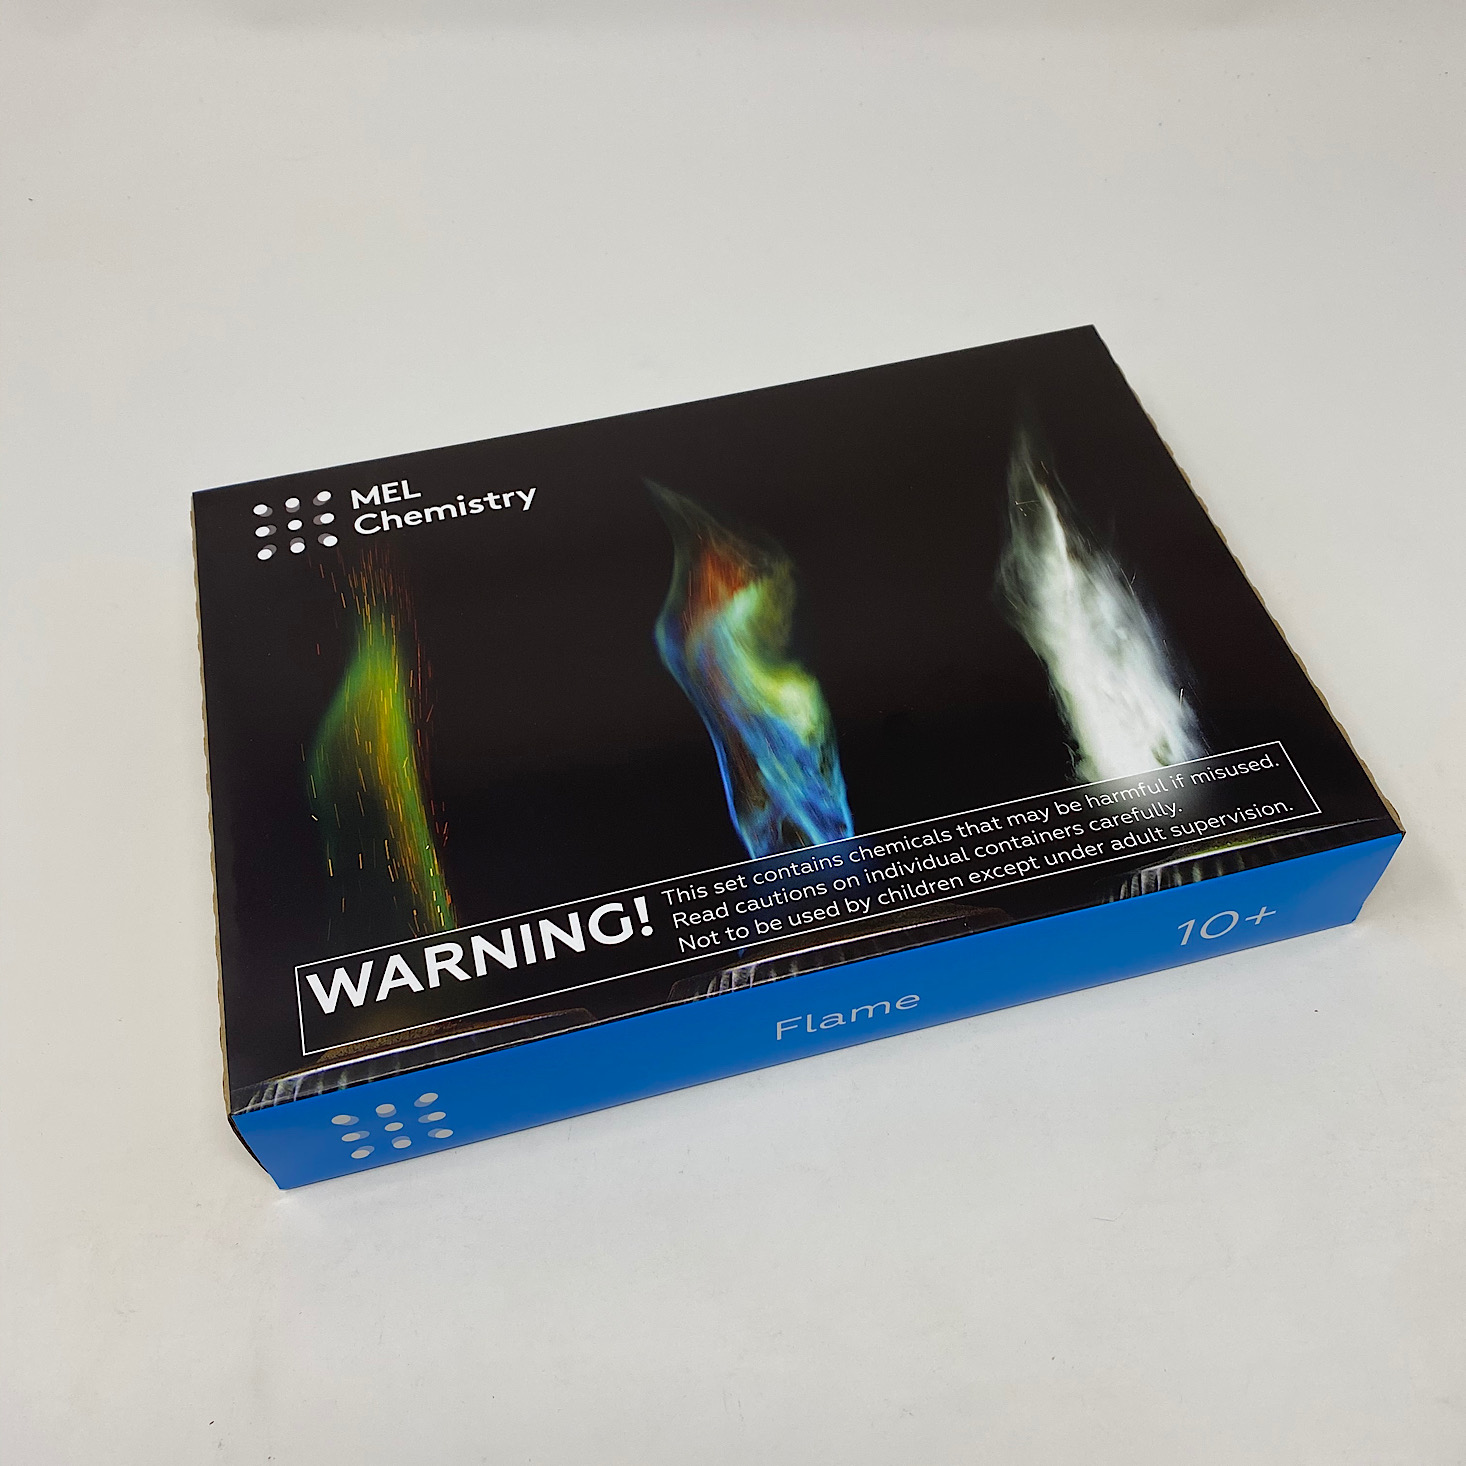 MEL Chemistry Subscription Review + Coupon – “Flame”